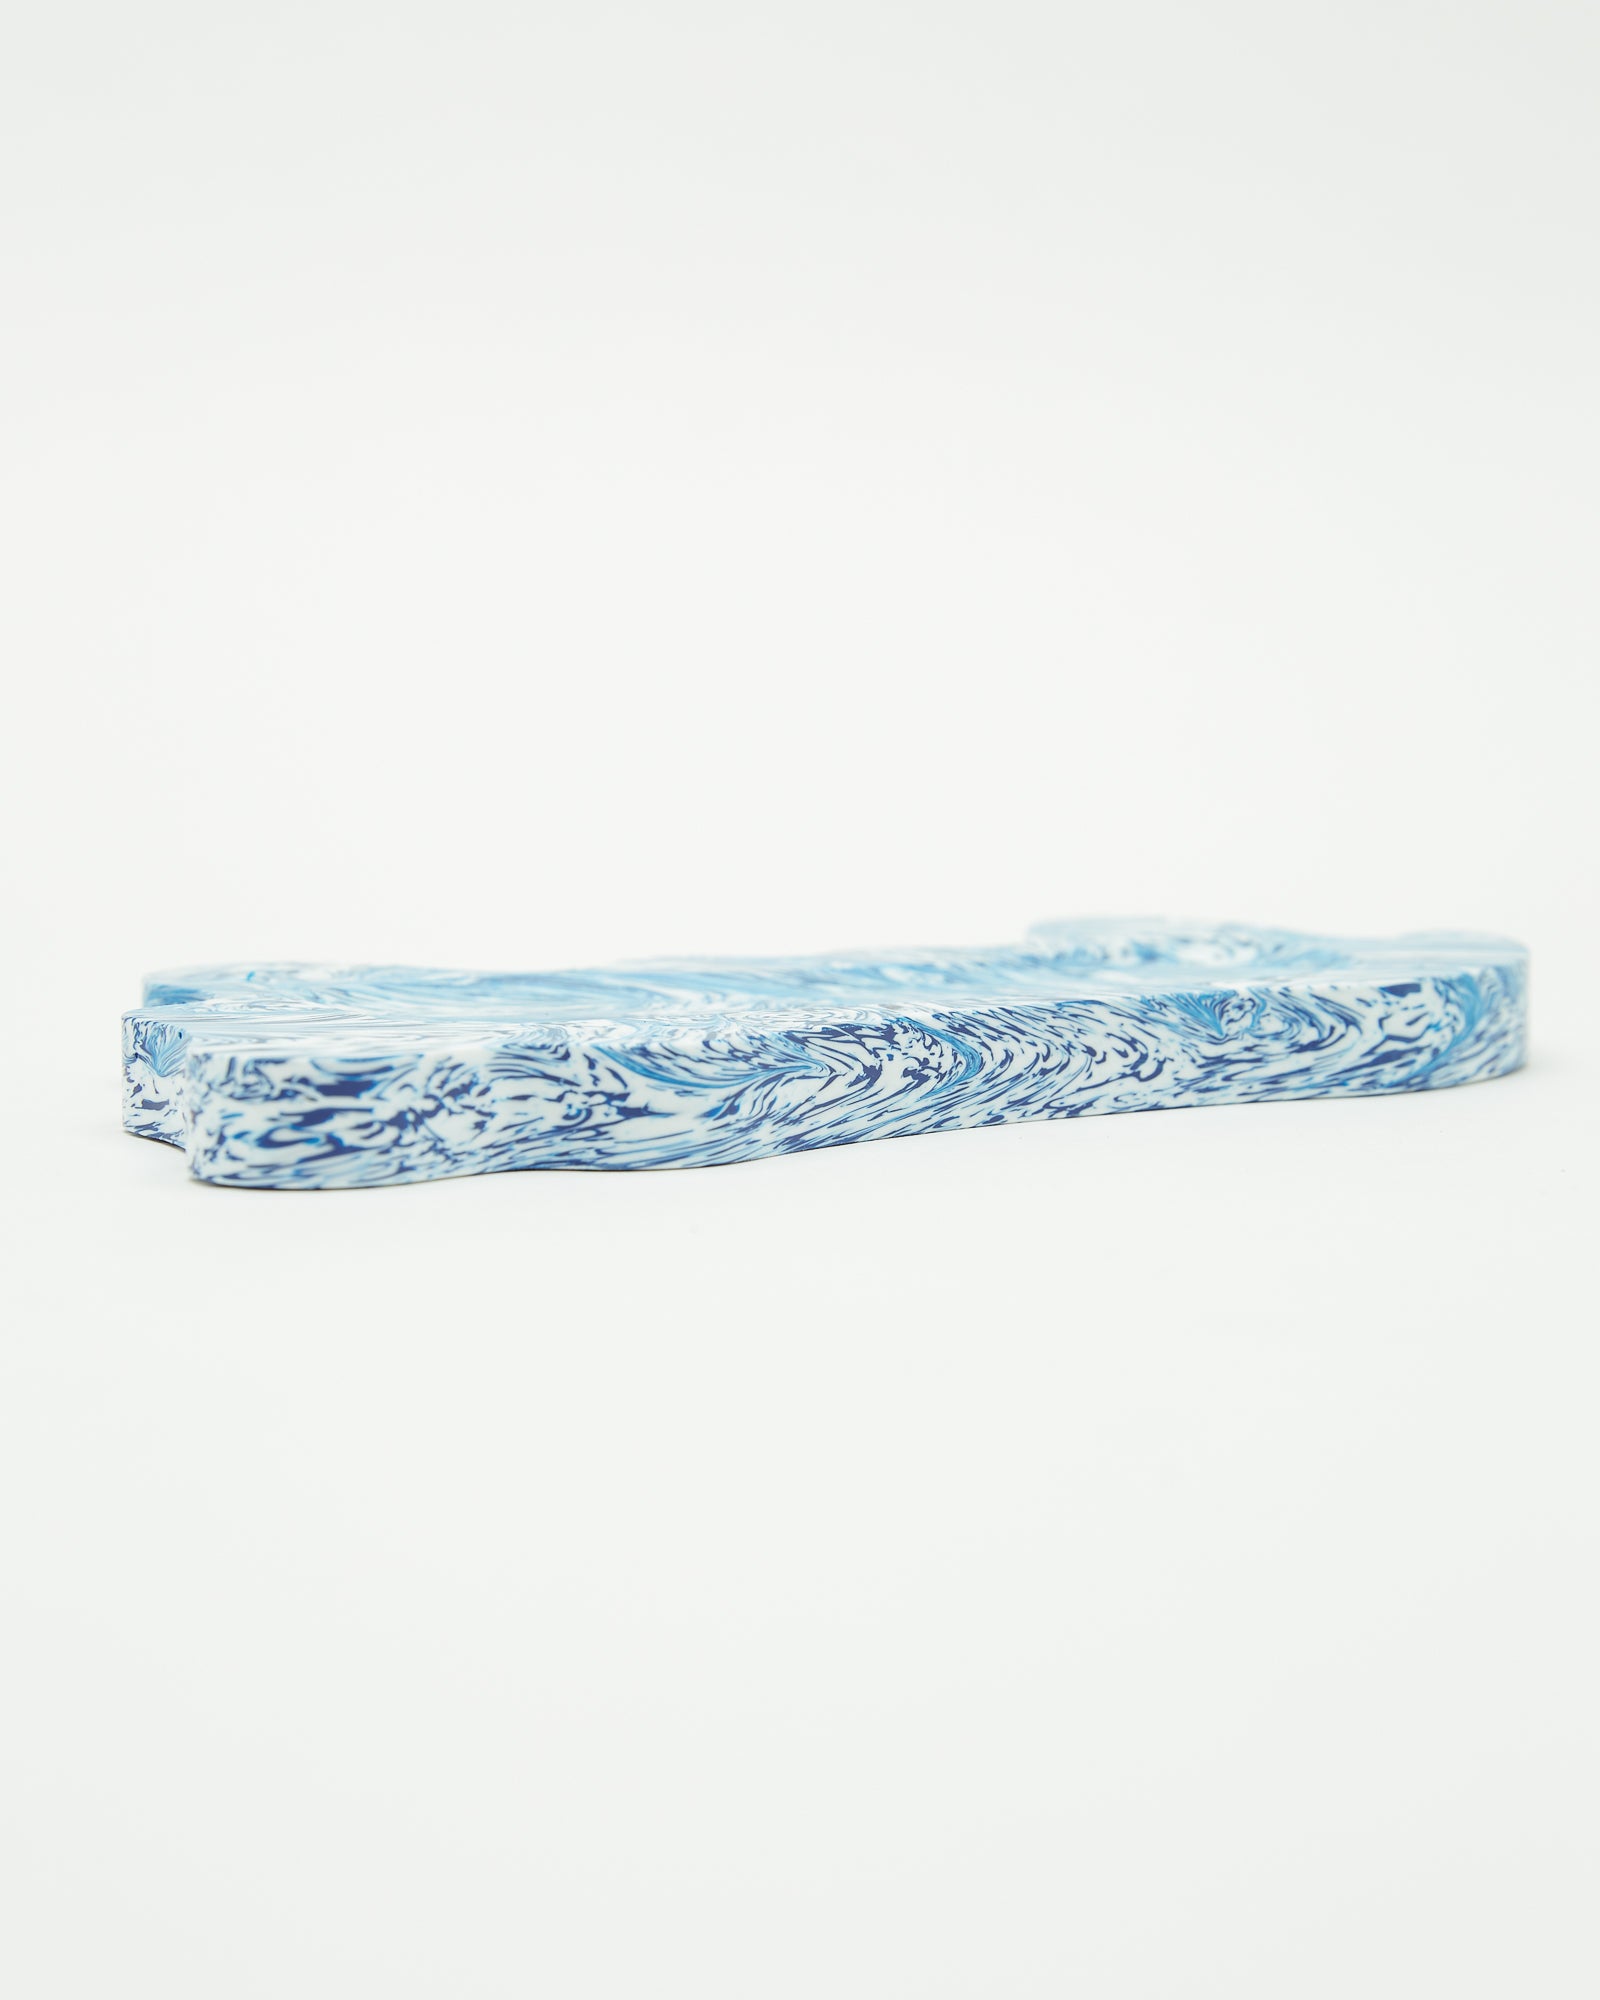 Melting Structures Desk Tray in Blue Wave